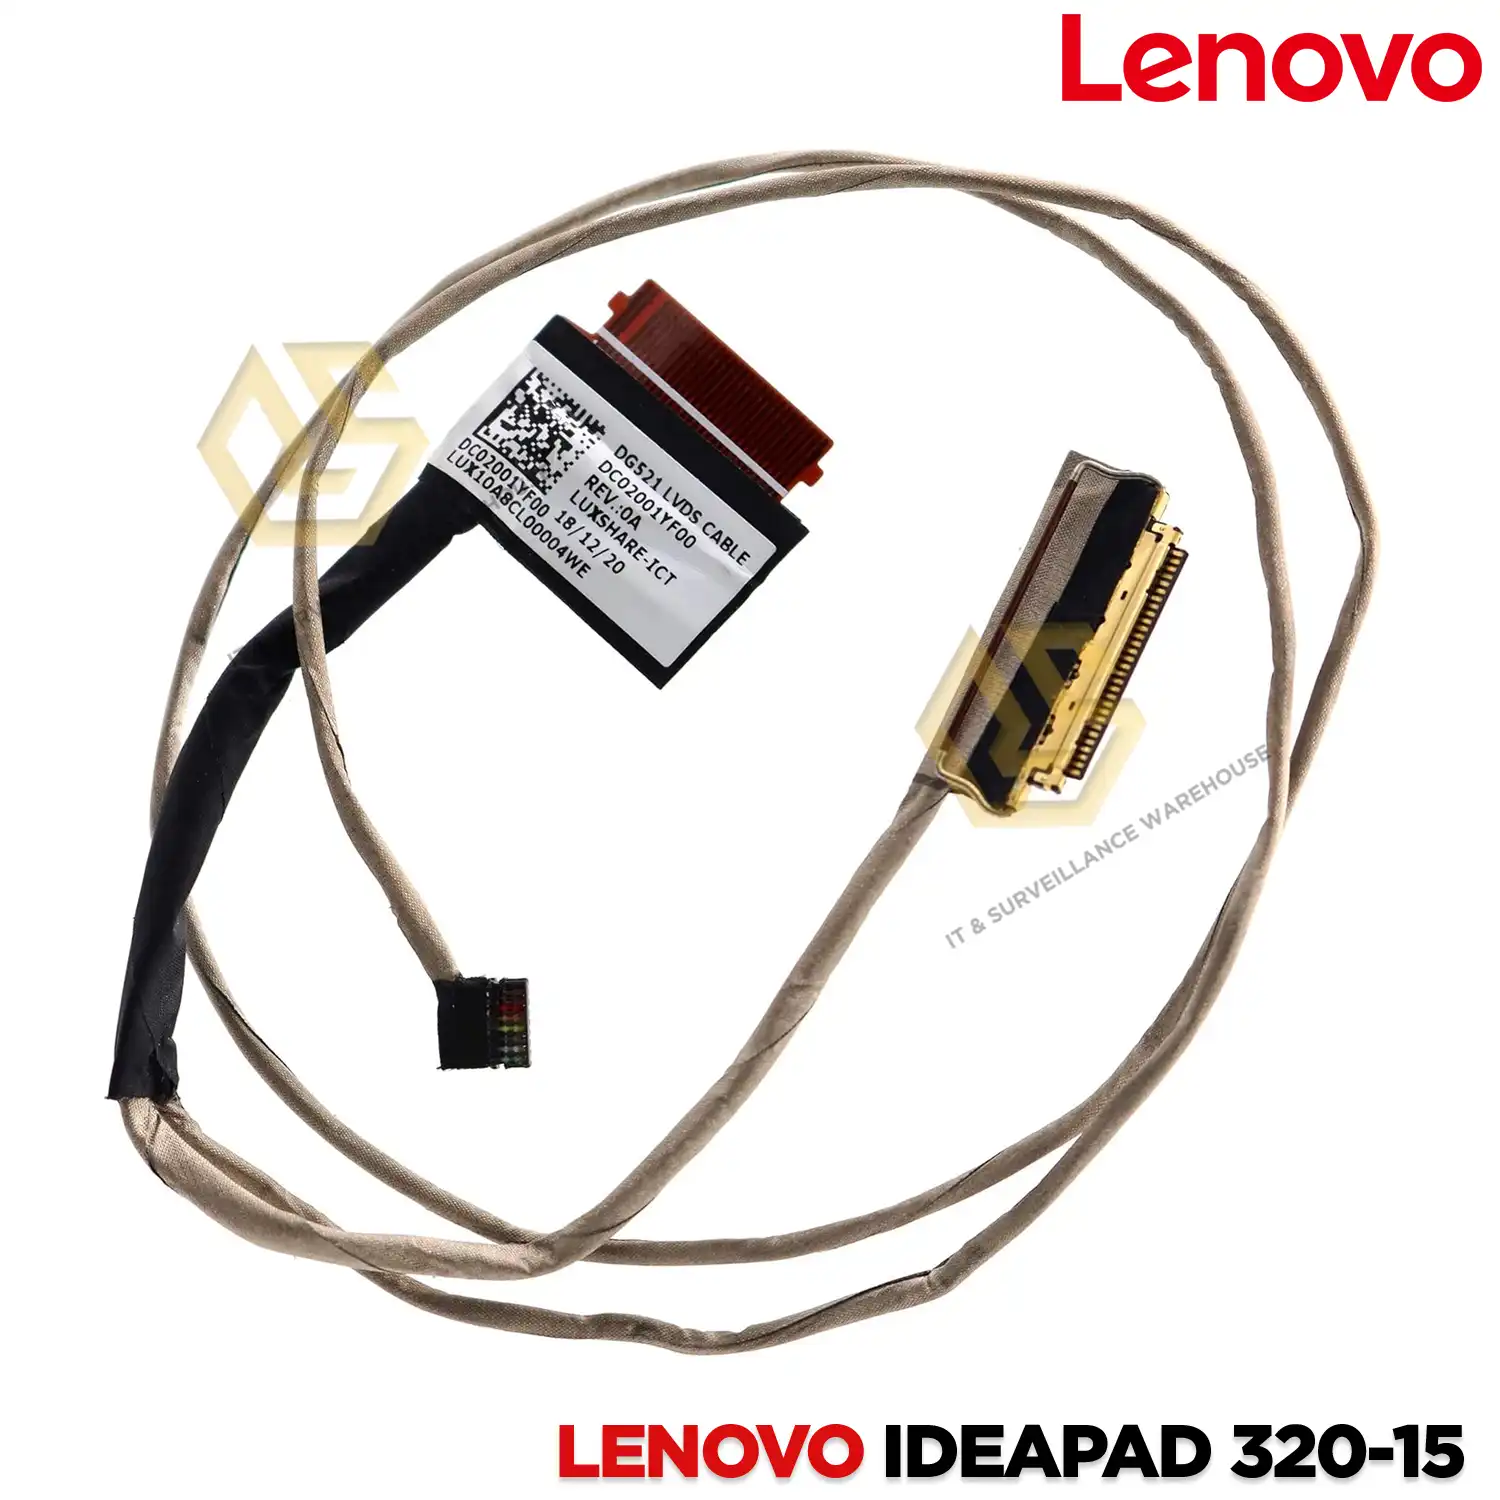 LAPTOP DISPLAY CABLE FOR LENOVO IDEAPAD 320-15 | 320-15ISK | 320-15IAP | 320-15ABR